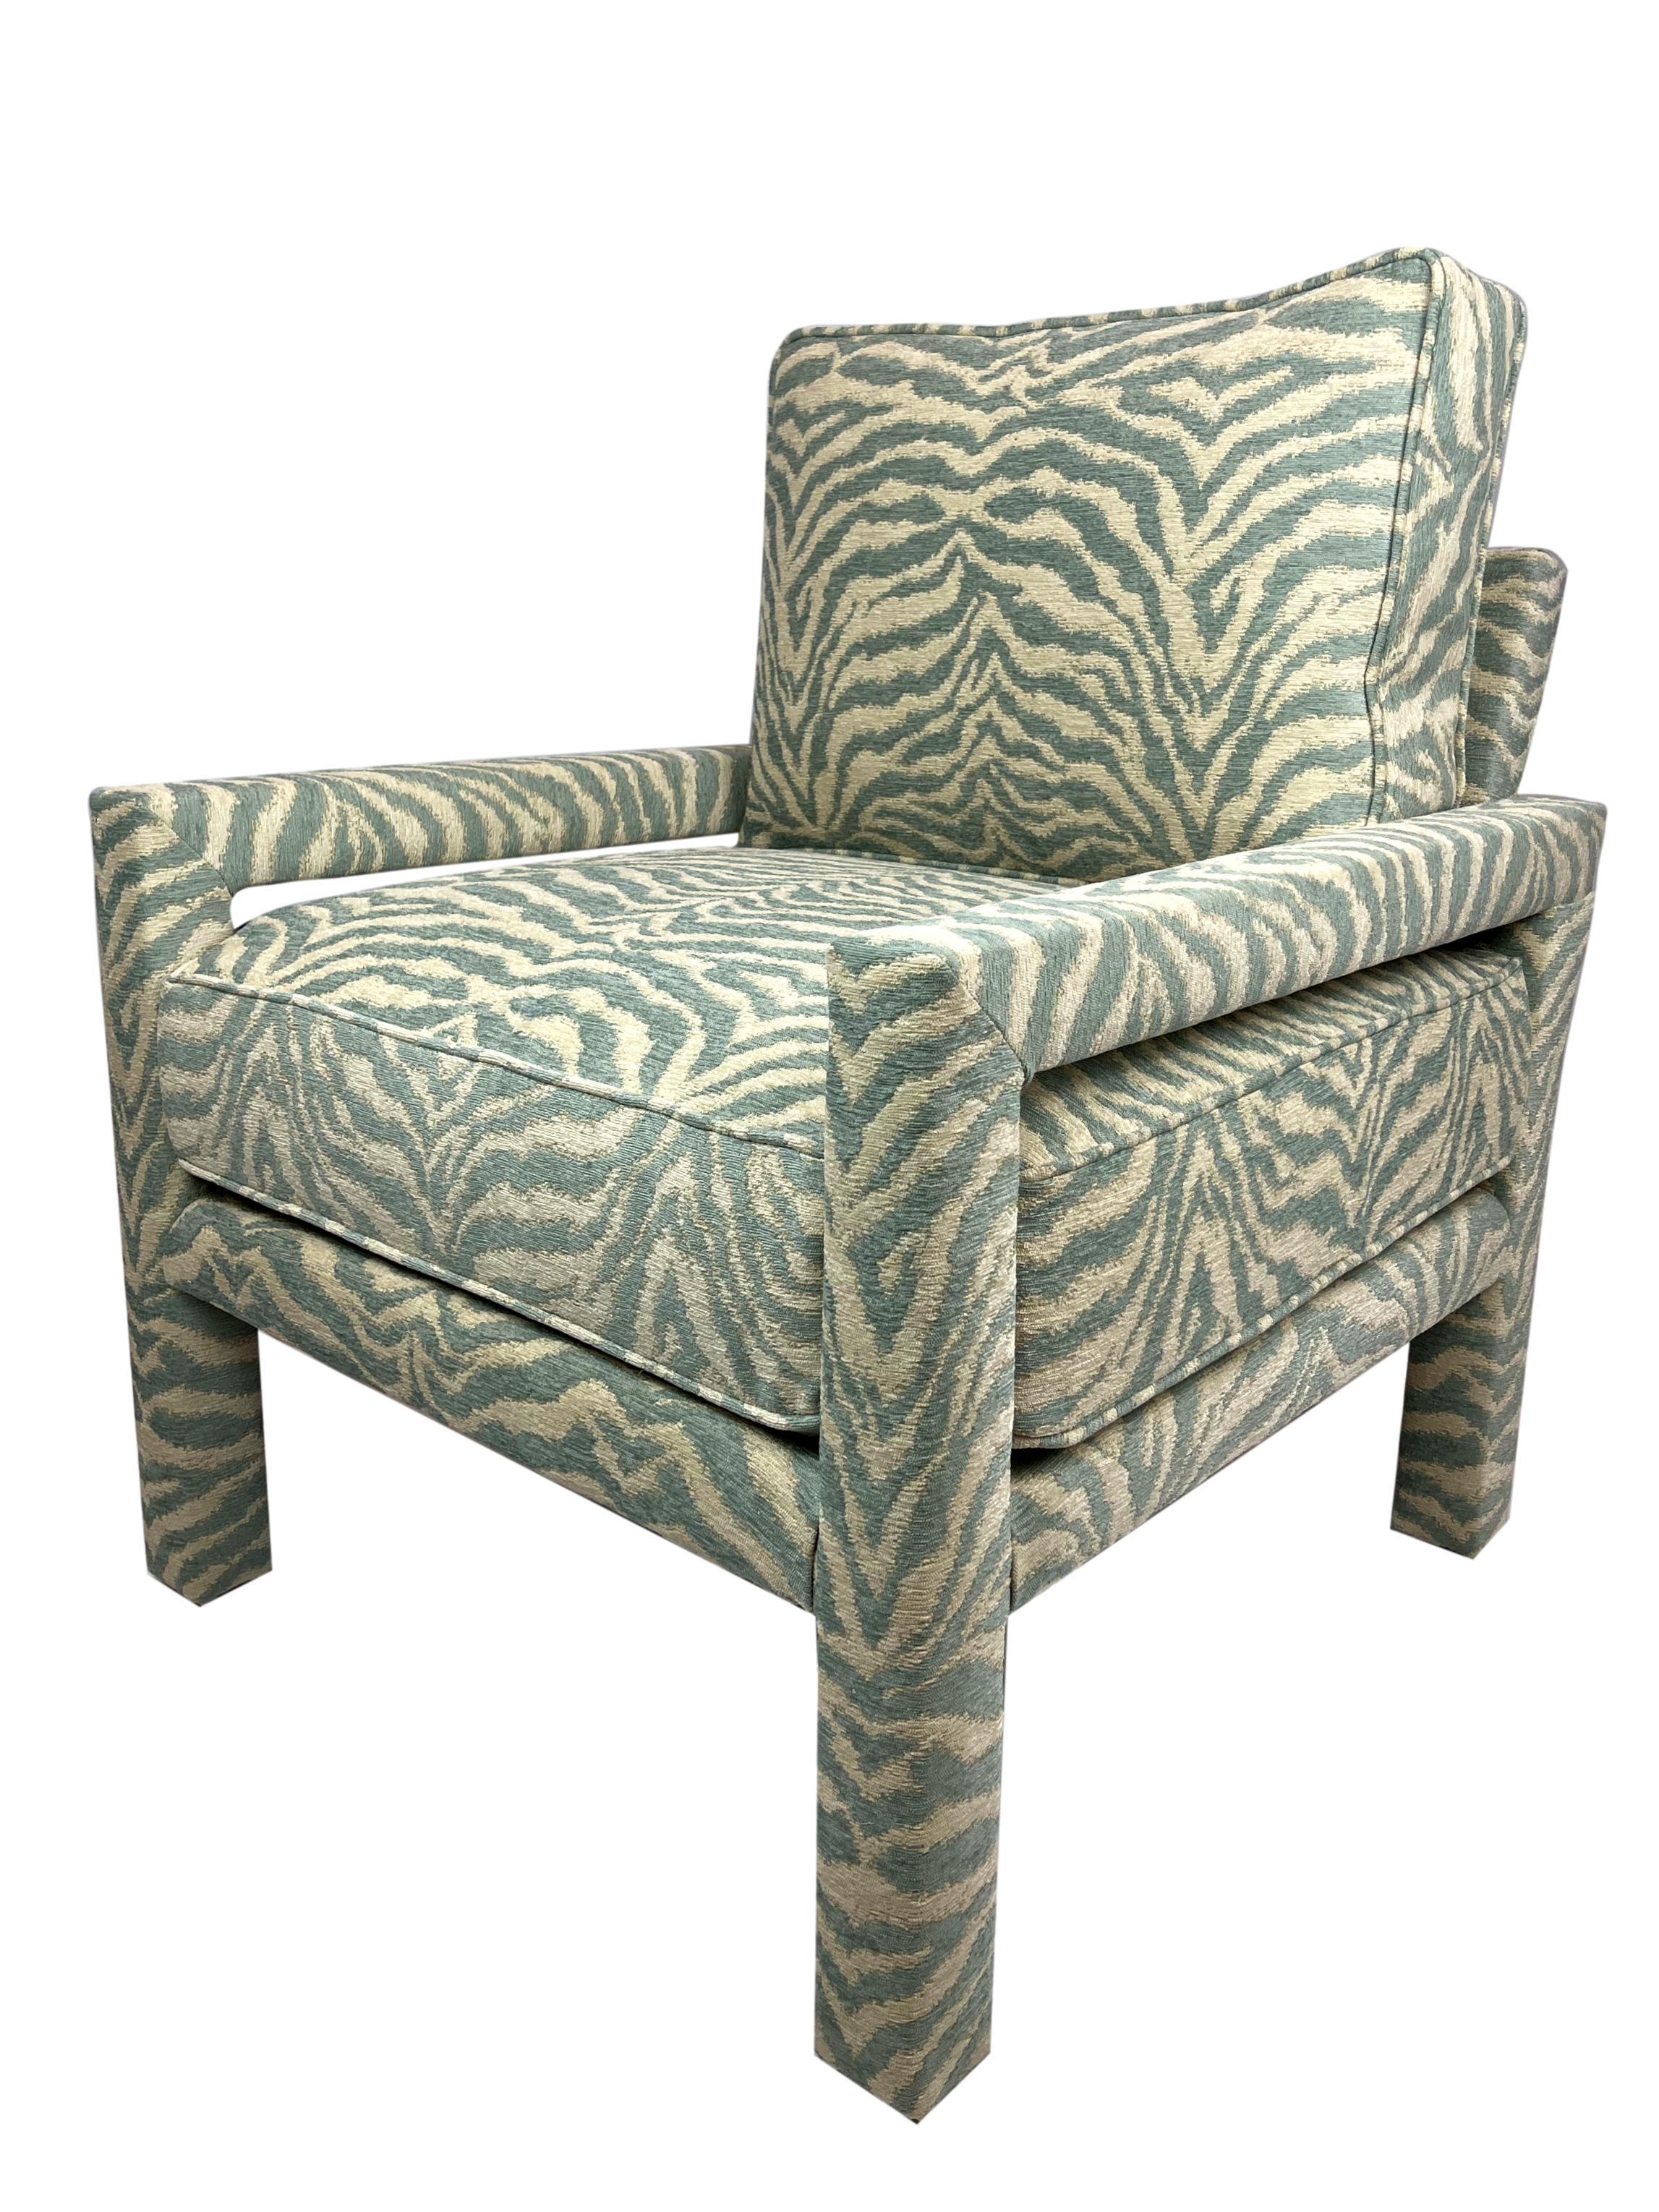 New Pair of Milo Baughman Style Parsons Chairs in Designer Celadon Zebra Fabric In New Condition For Sale In Banner Elk, NC